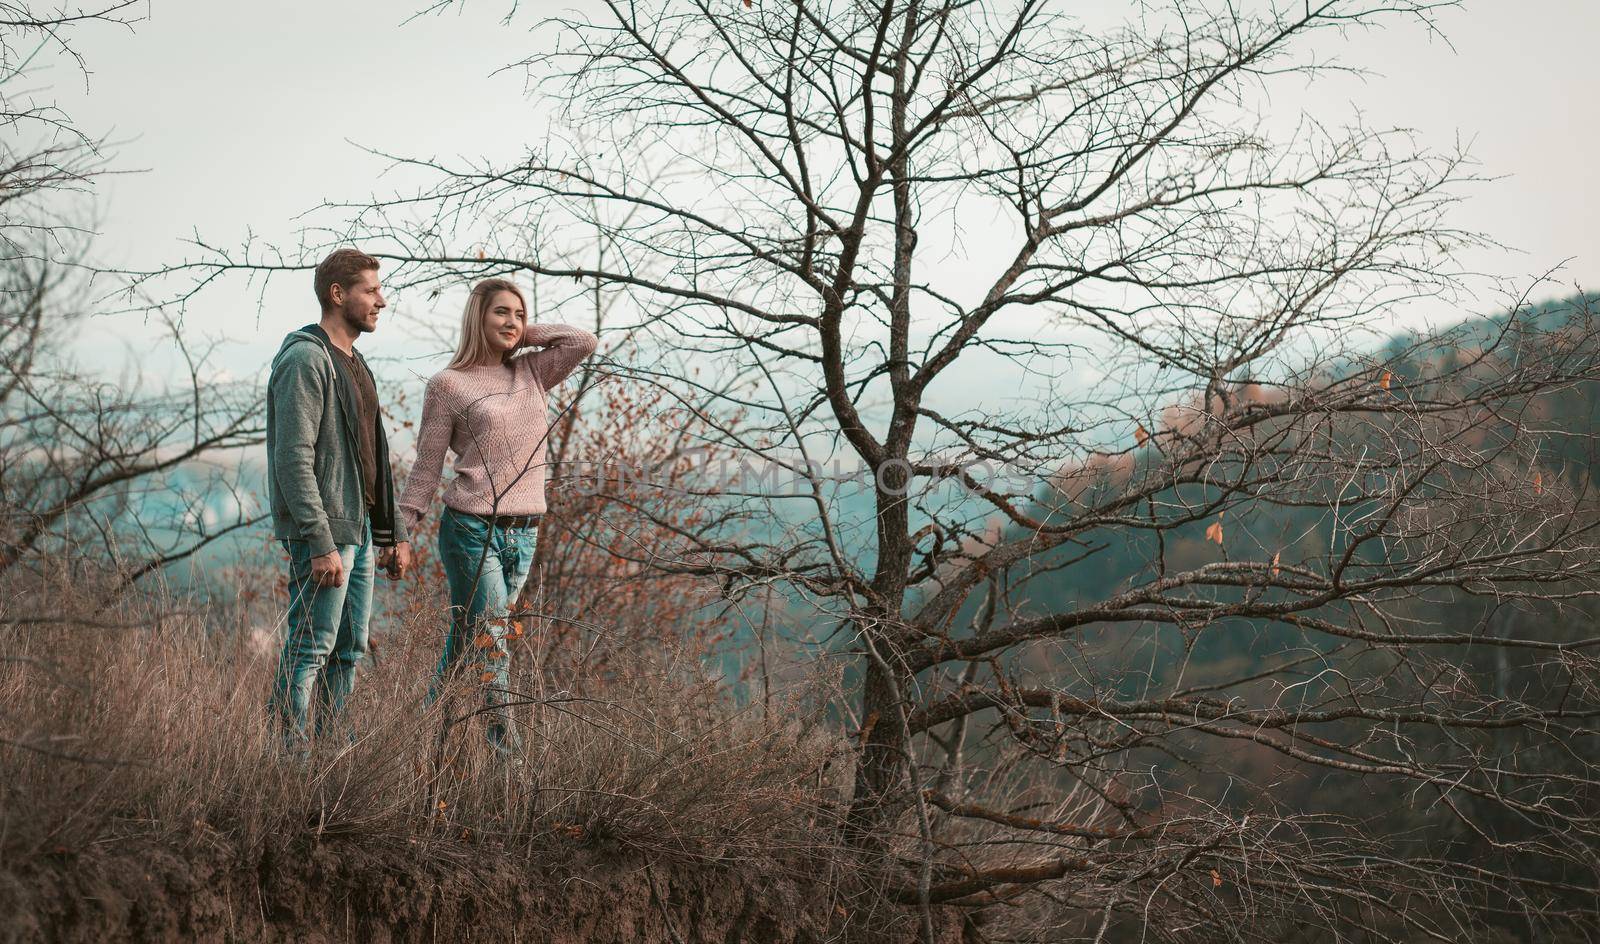 Happy Man and Woman dating in nature. Couple of young people in love stands holding hands while admiring the natural landscape. Adventure and travel concept by LipikStockMedia